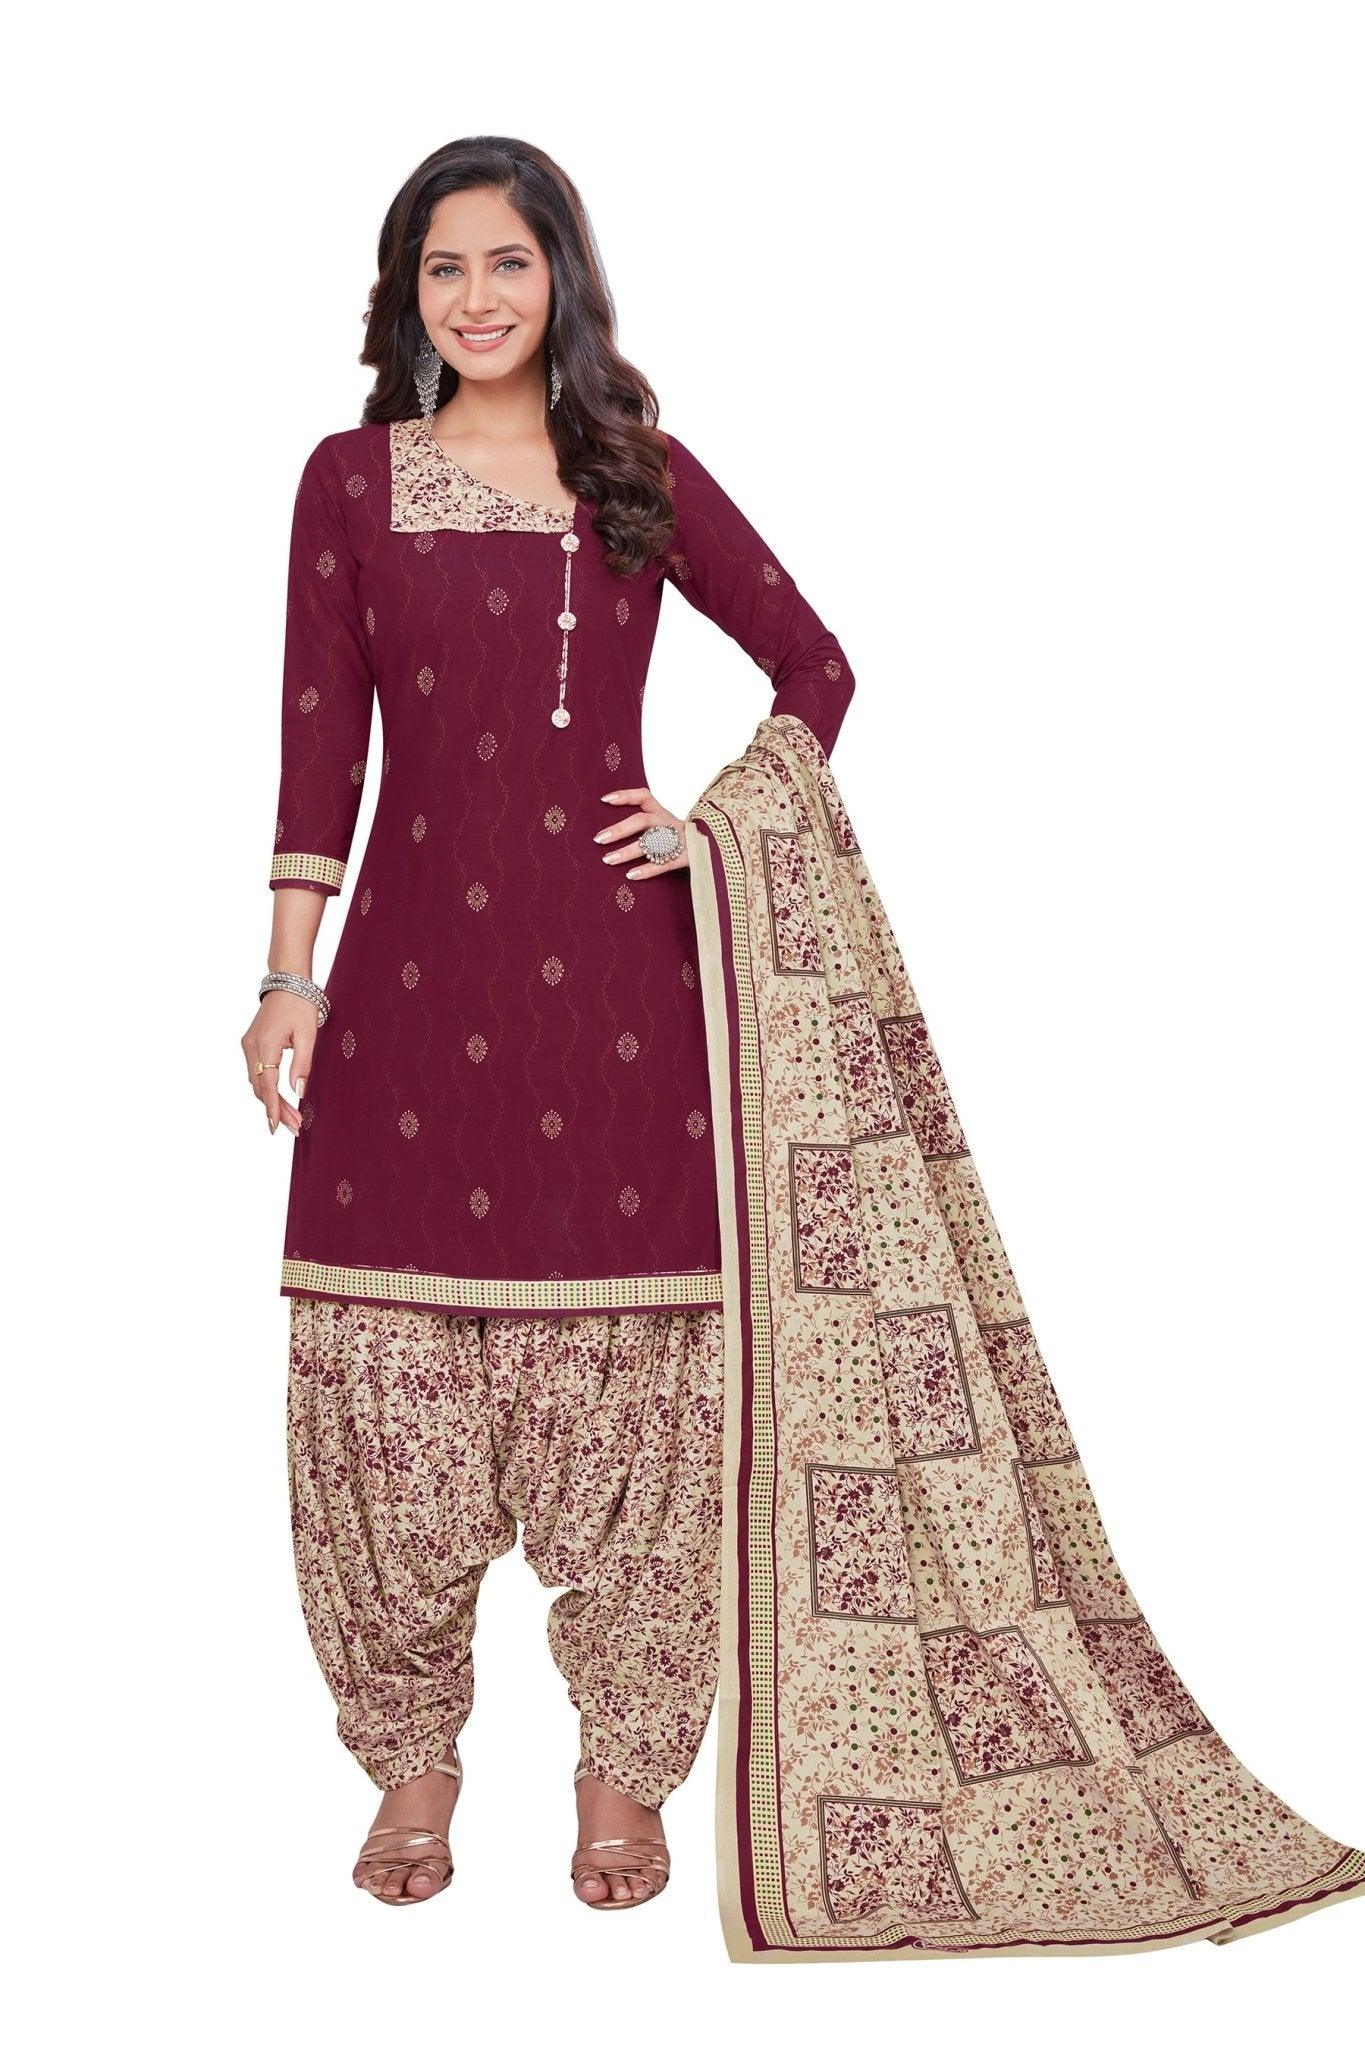 Pure Cotton Asymmetrical Neckline Maroon Top with Vanilla Patilaya Pant and Cotton Dupatta (Readymade/Stitched) - Bavis Clothing